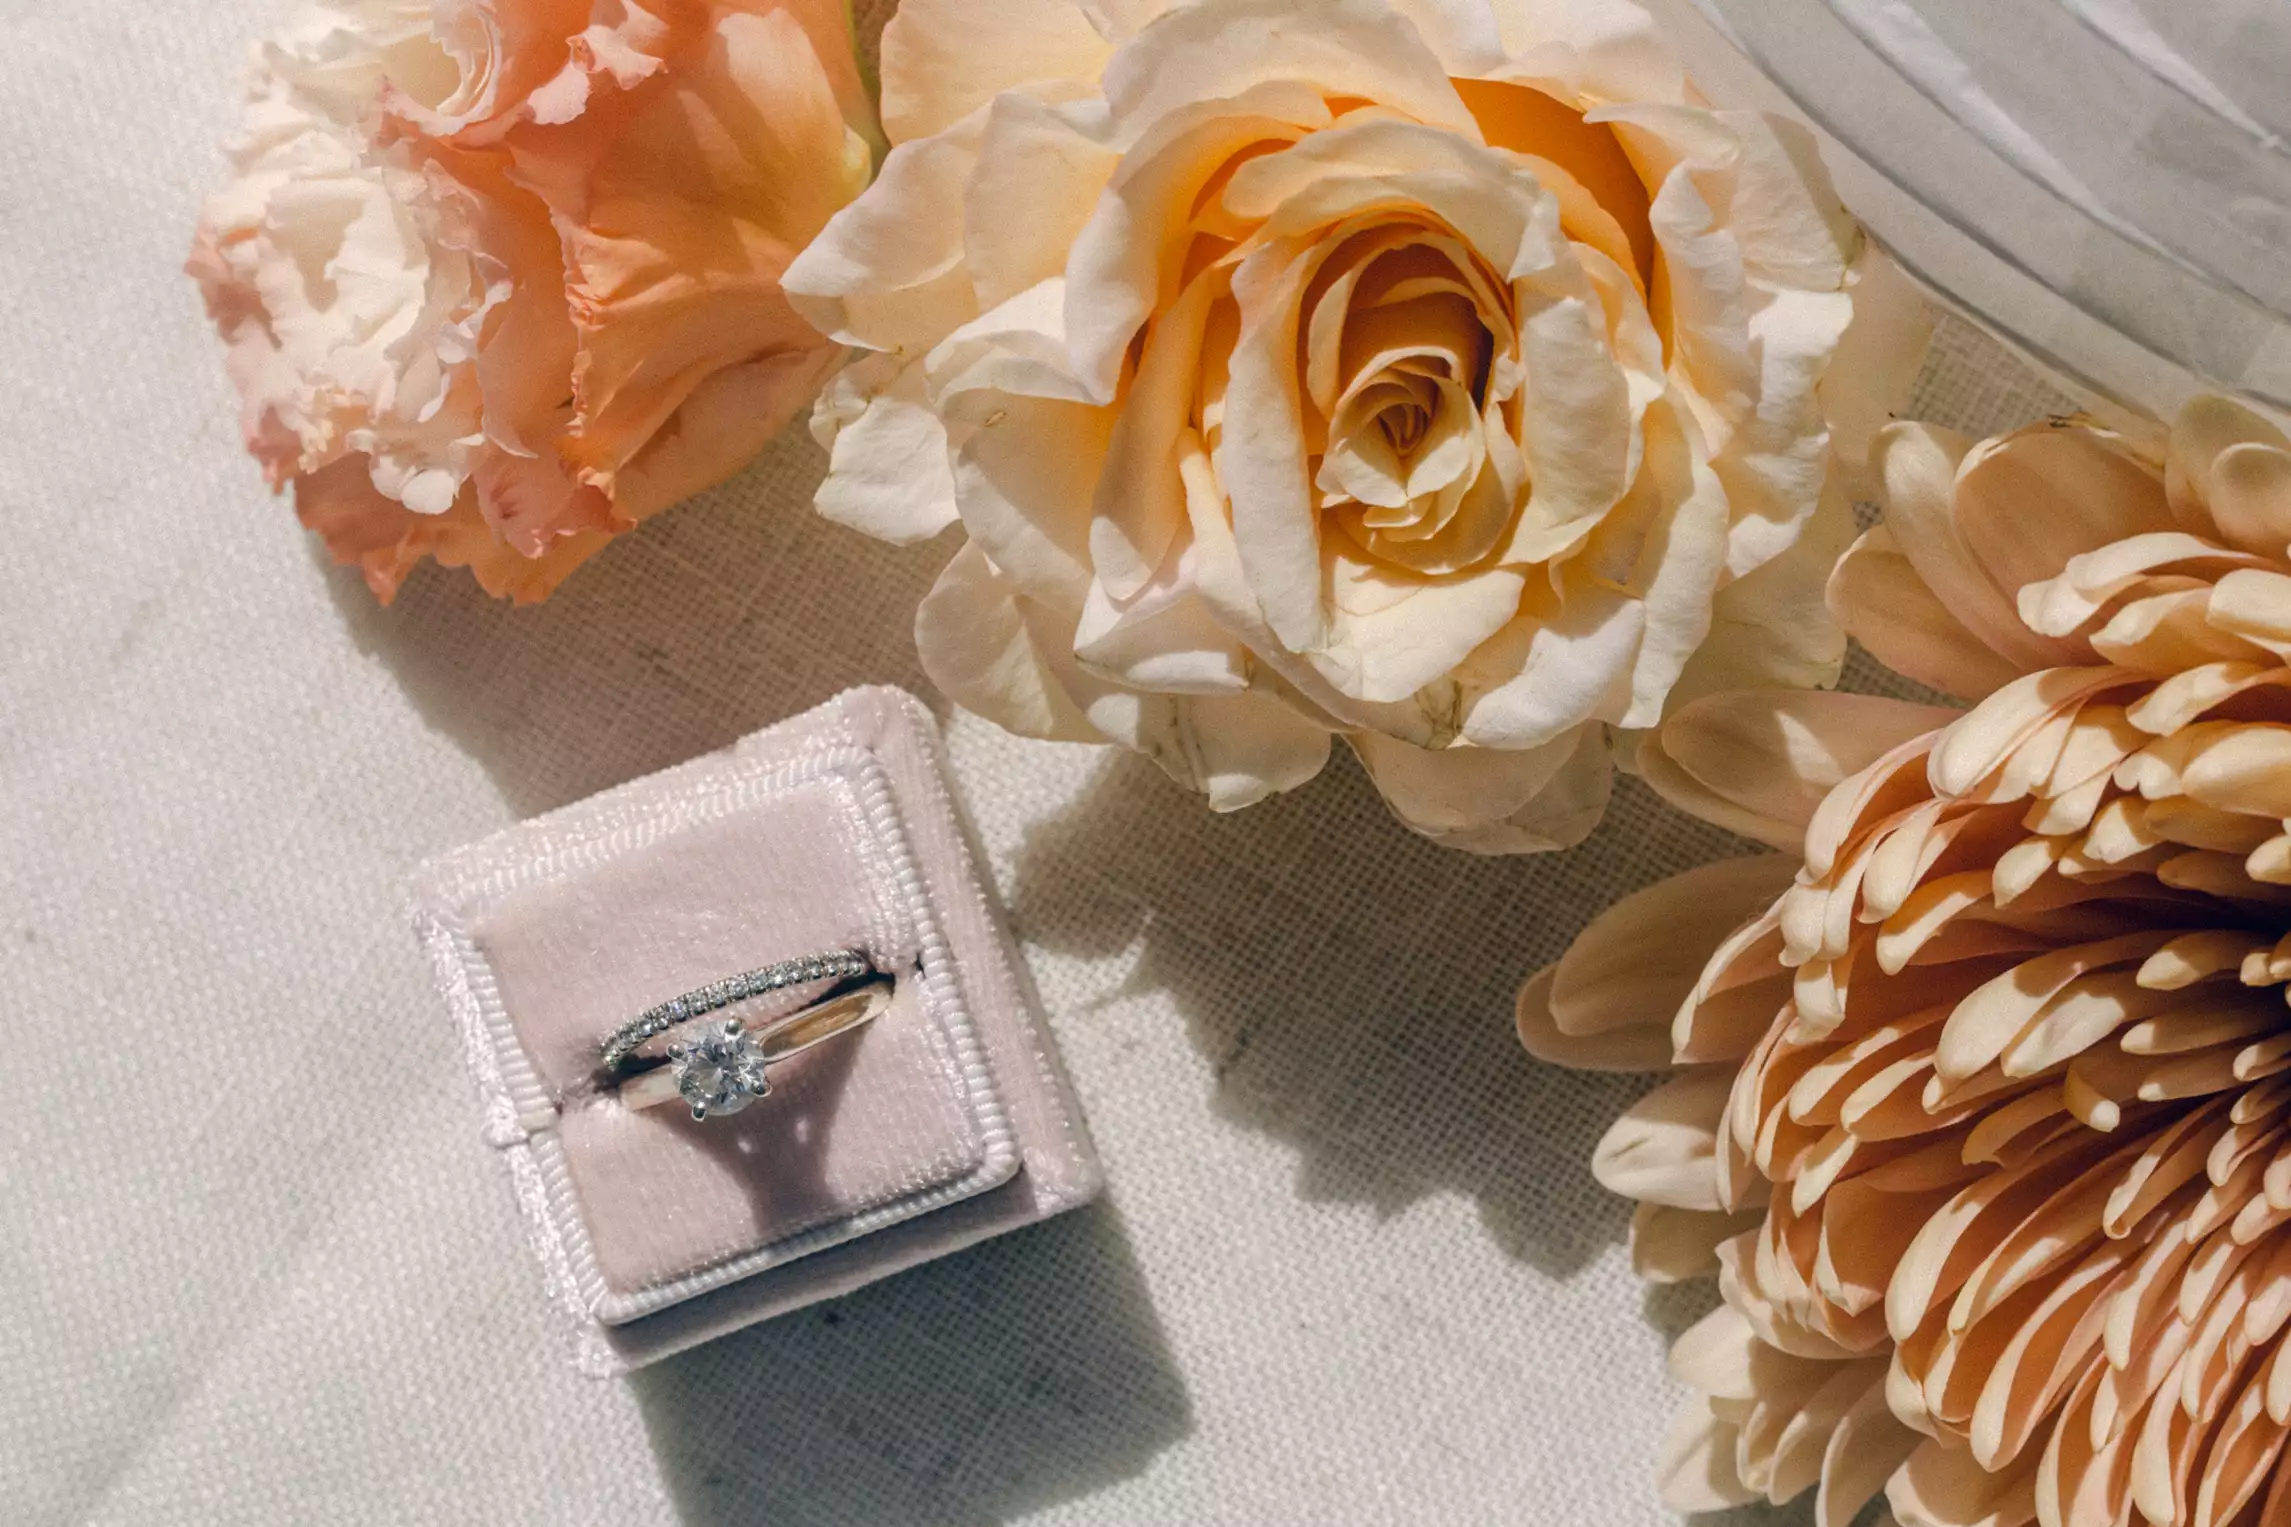 Rae Allen Photography | A detail shot of a ring in a pink box with pink roses